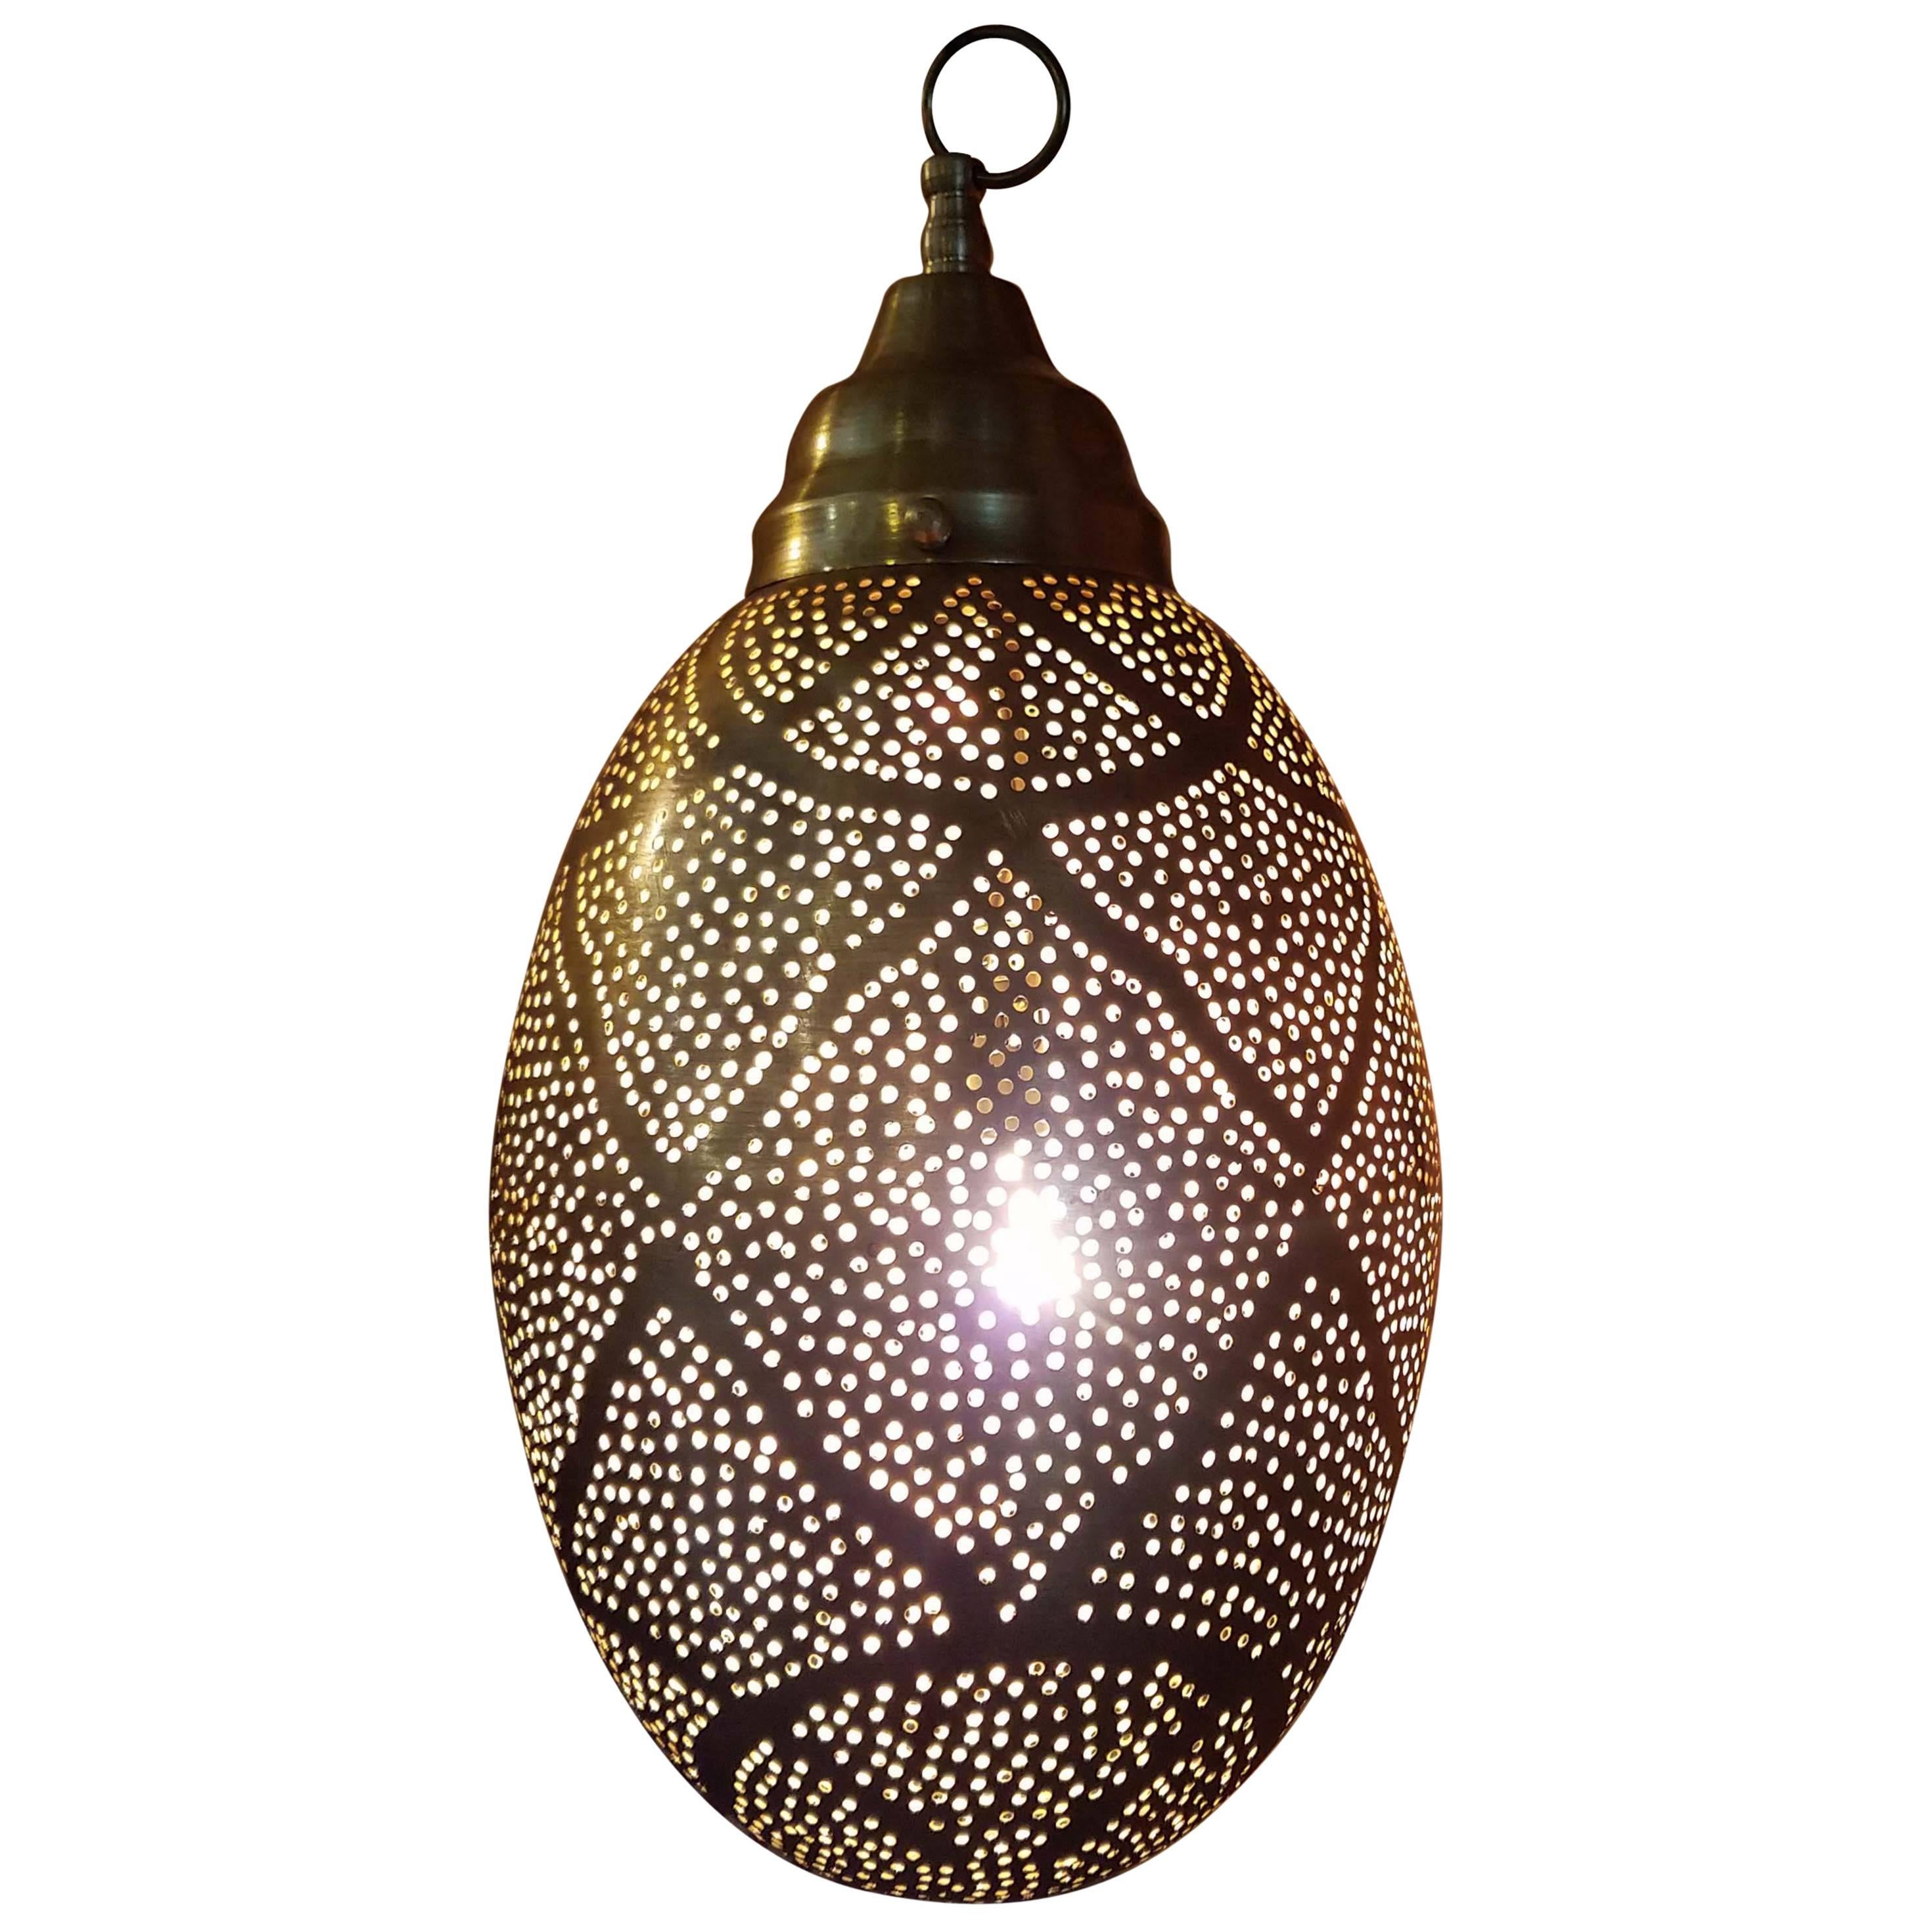 Moroccan Copper Wall / Ceiling Lamp or Lantern, Egg Shape For Sale